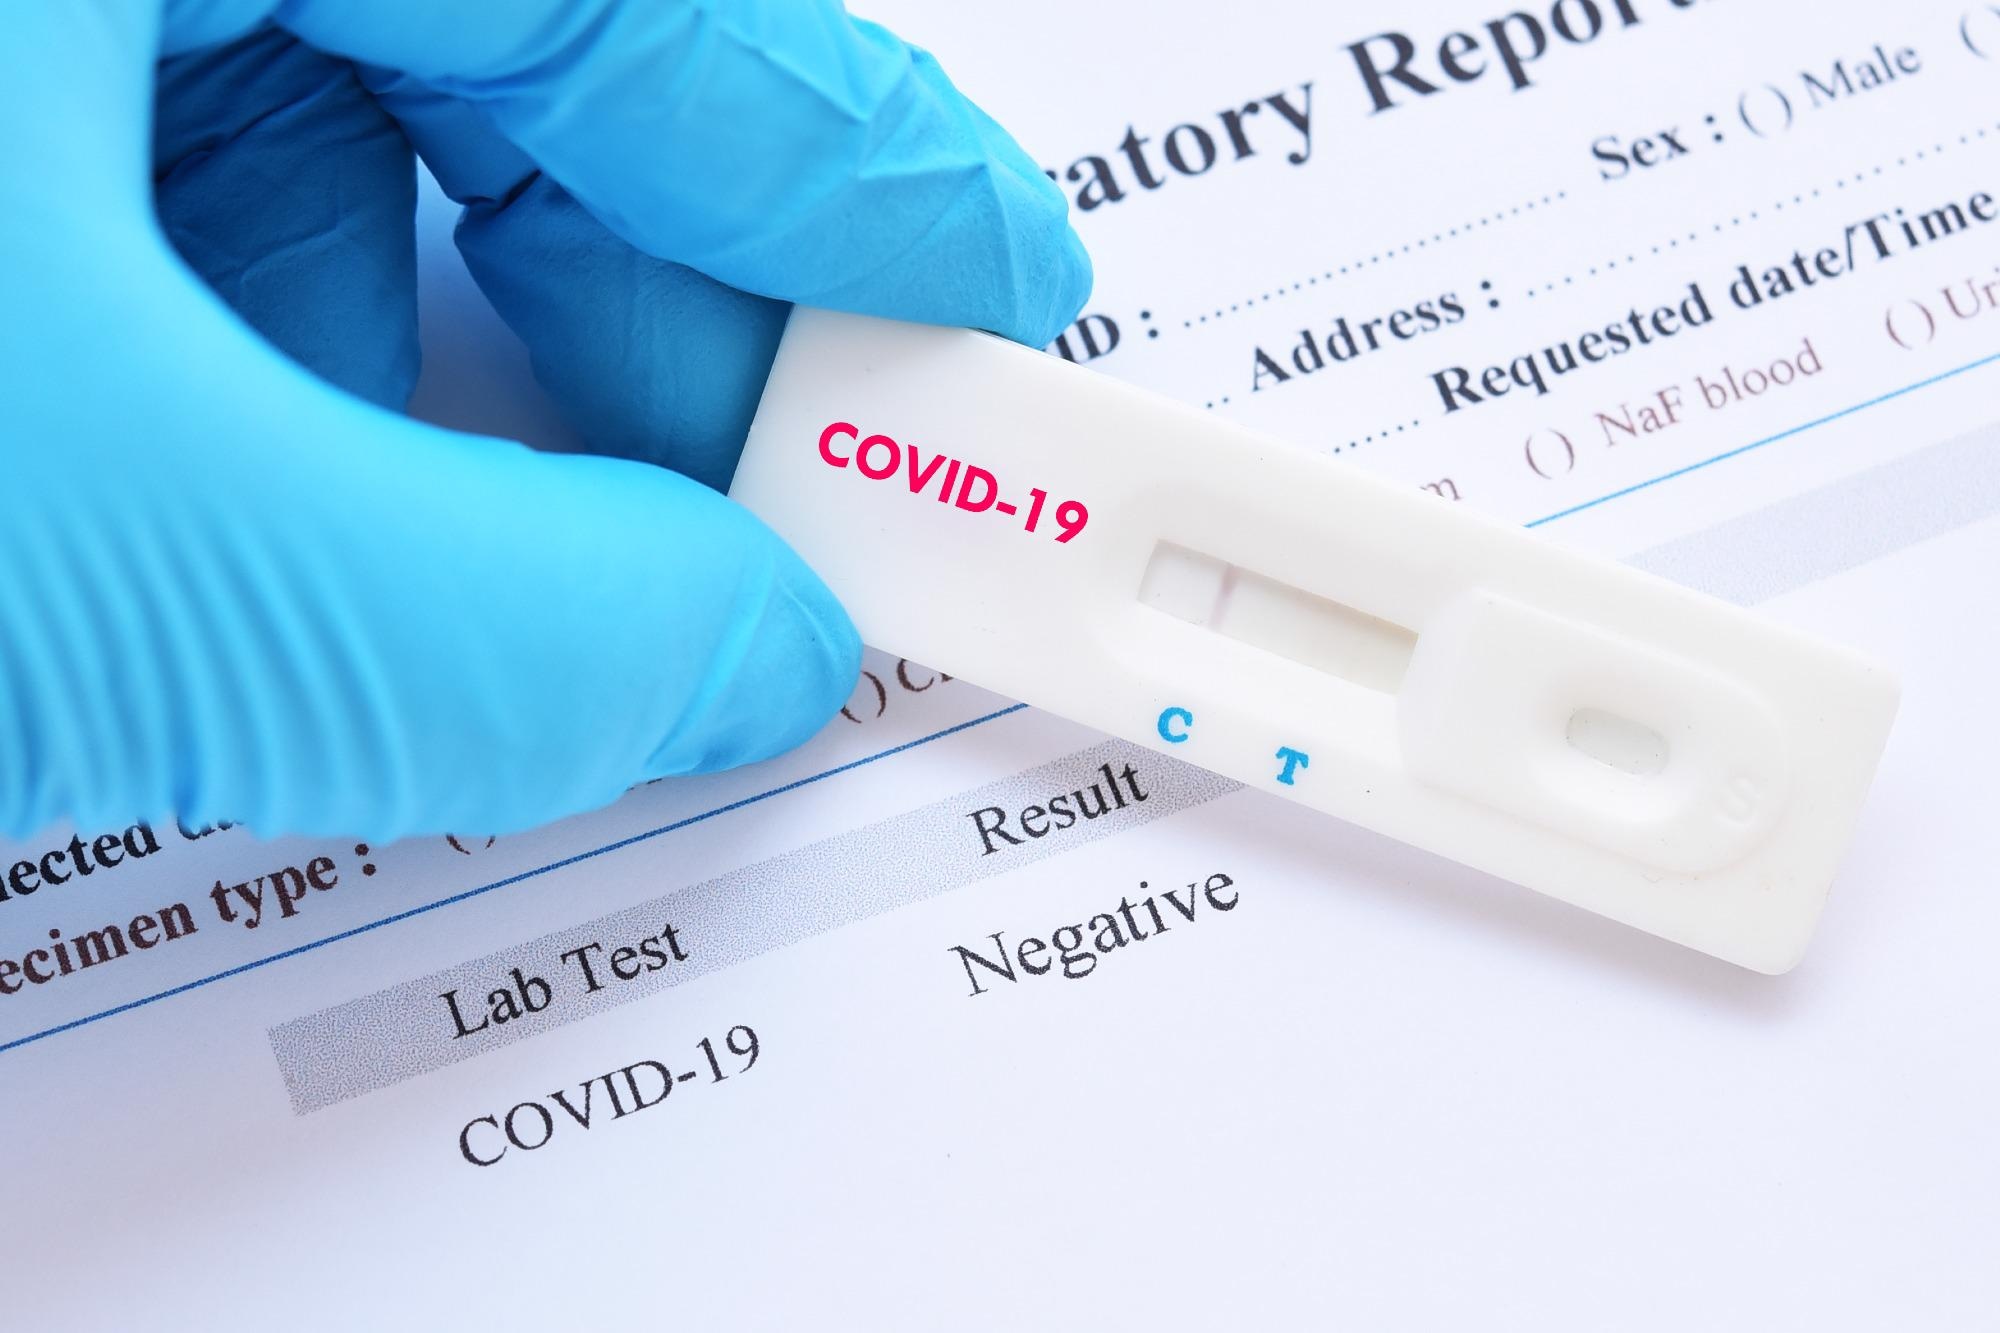 Study: Comparison of Rapid Antigen Tests’ Performance between Delta (B.1.61.7; AY.X) and Omicron (B.1.1.529; BA1) Variants of SARS-CoV-2: Secondary Analysis from a Serial Home Self-Testing Study. Image Credit: Jarun Ontakrai / Shutterstock